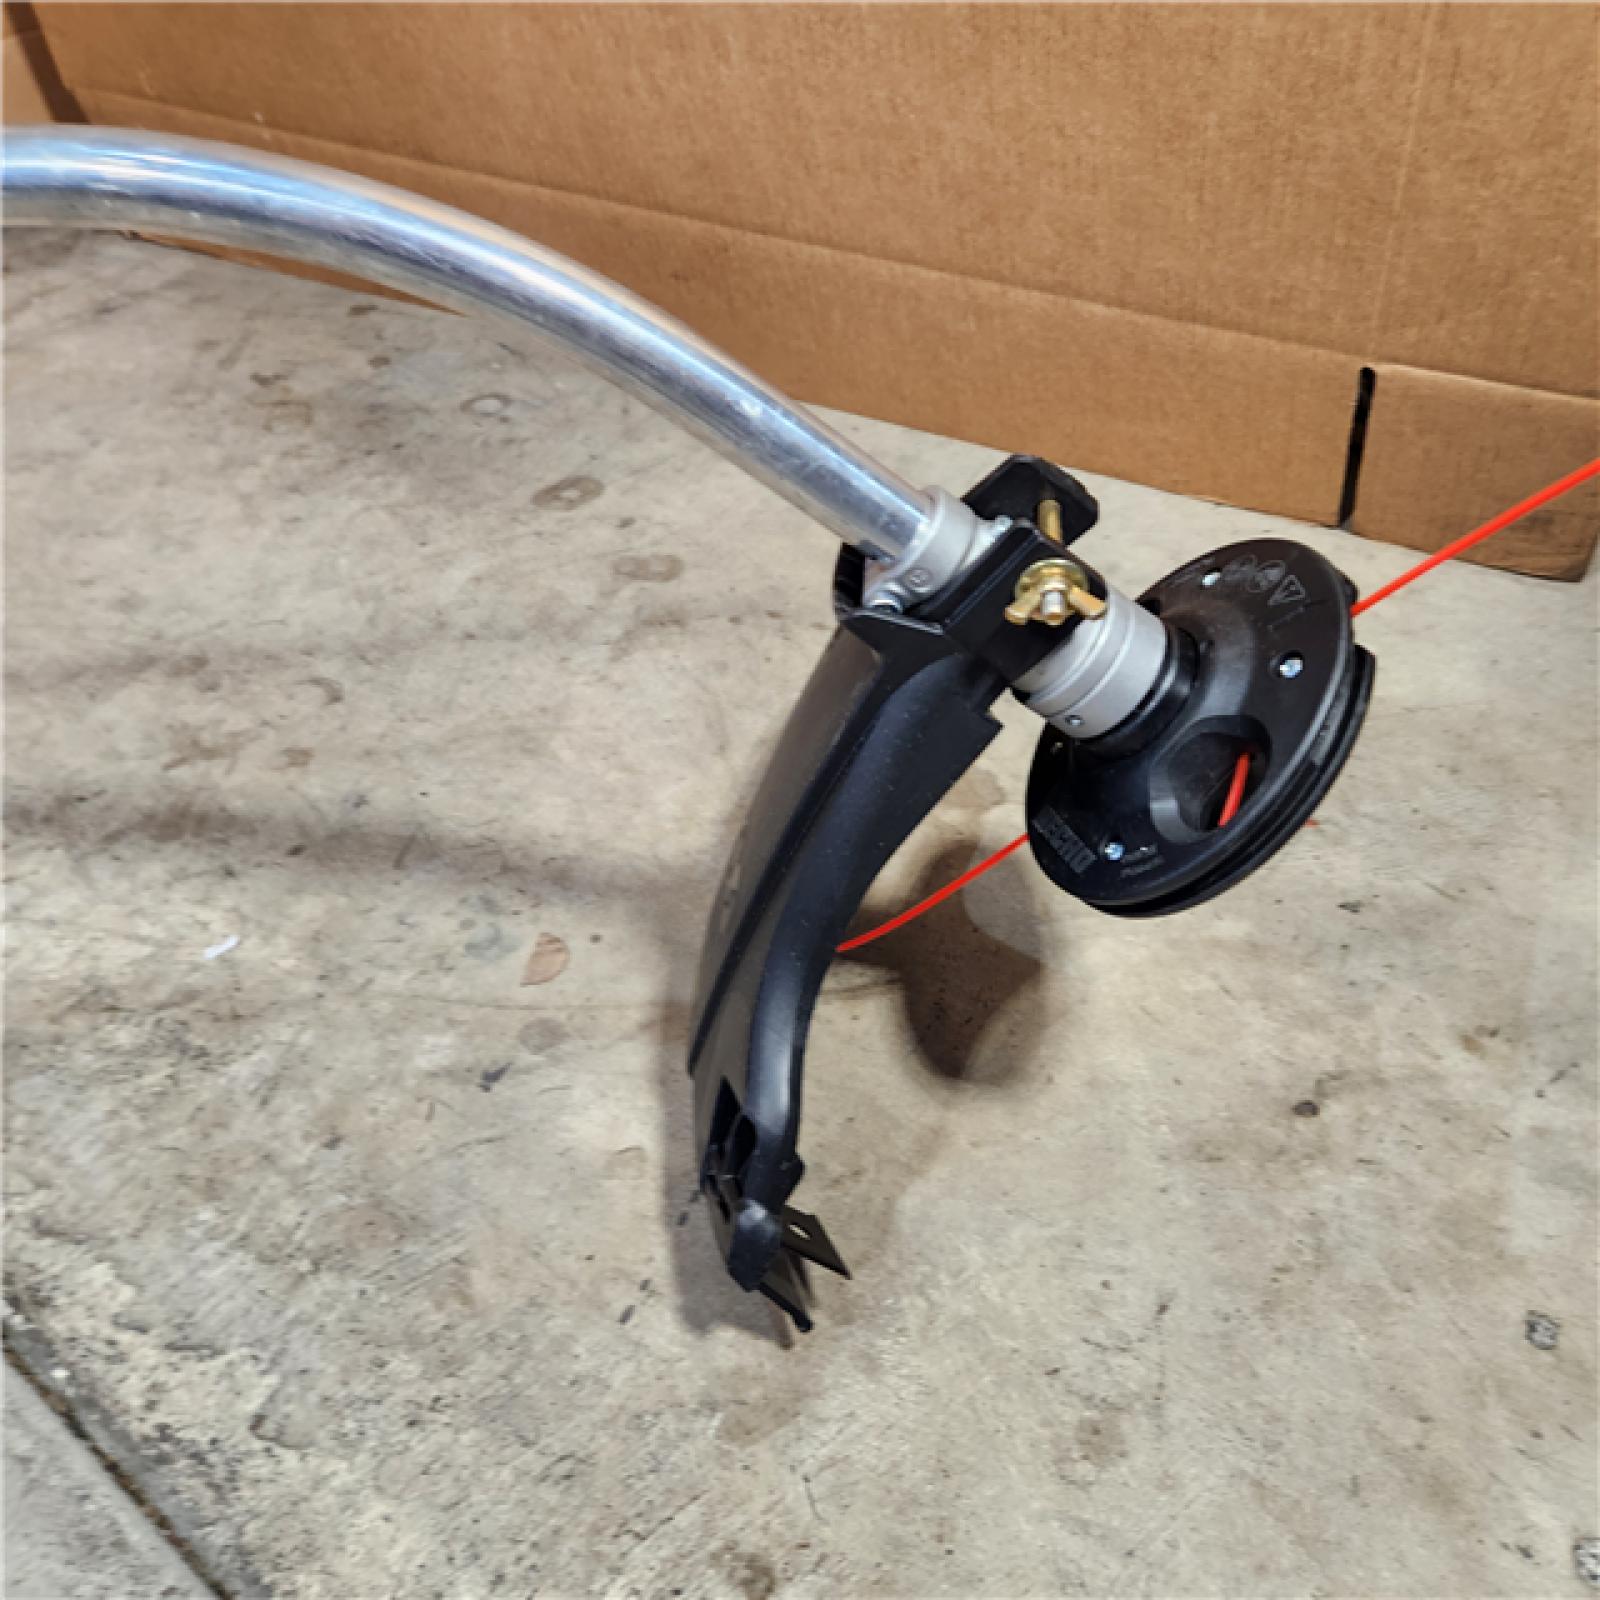 Houston Location - AS-IS Echo GT-225 21.2cc 2 Stroke Lightweight Durable Gas Curved Shaft String Trimmer -Appears IN GOOD Condition